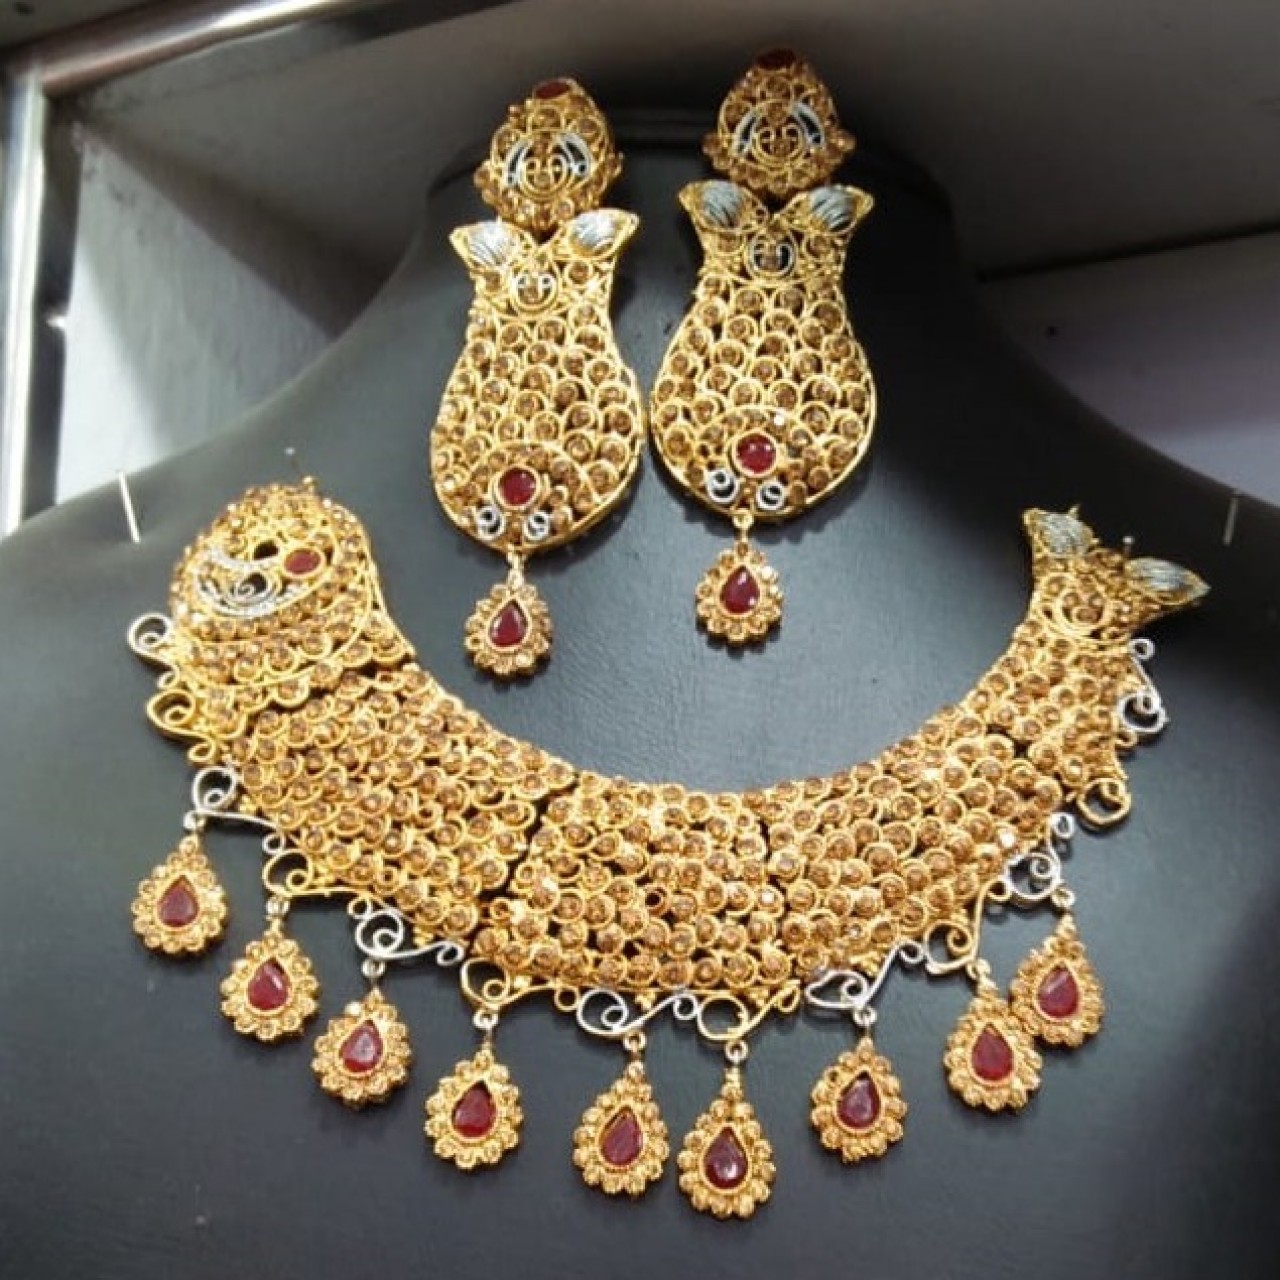 Neckless & Earrings Jewelry Set With Red Gemstones For Women - Casting Material